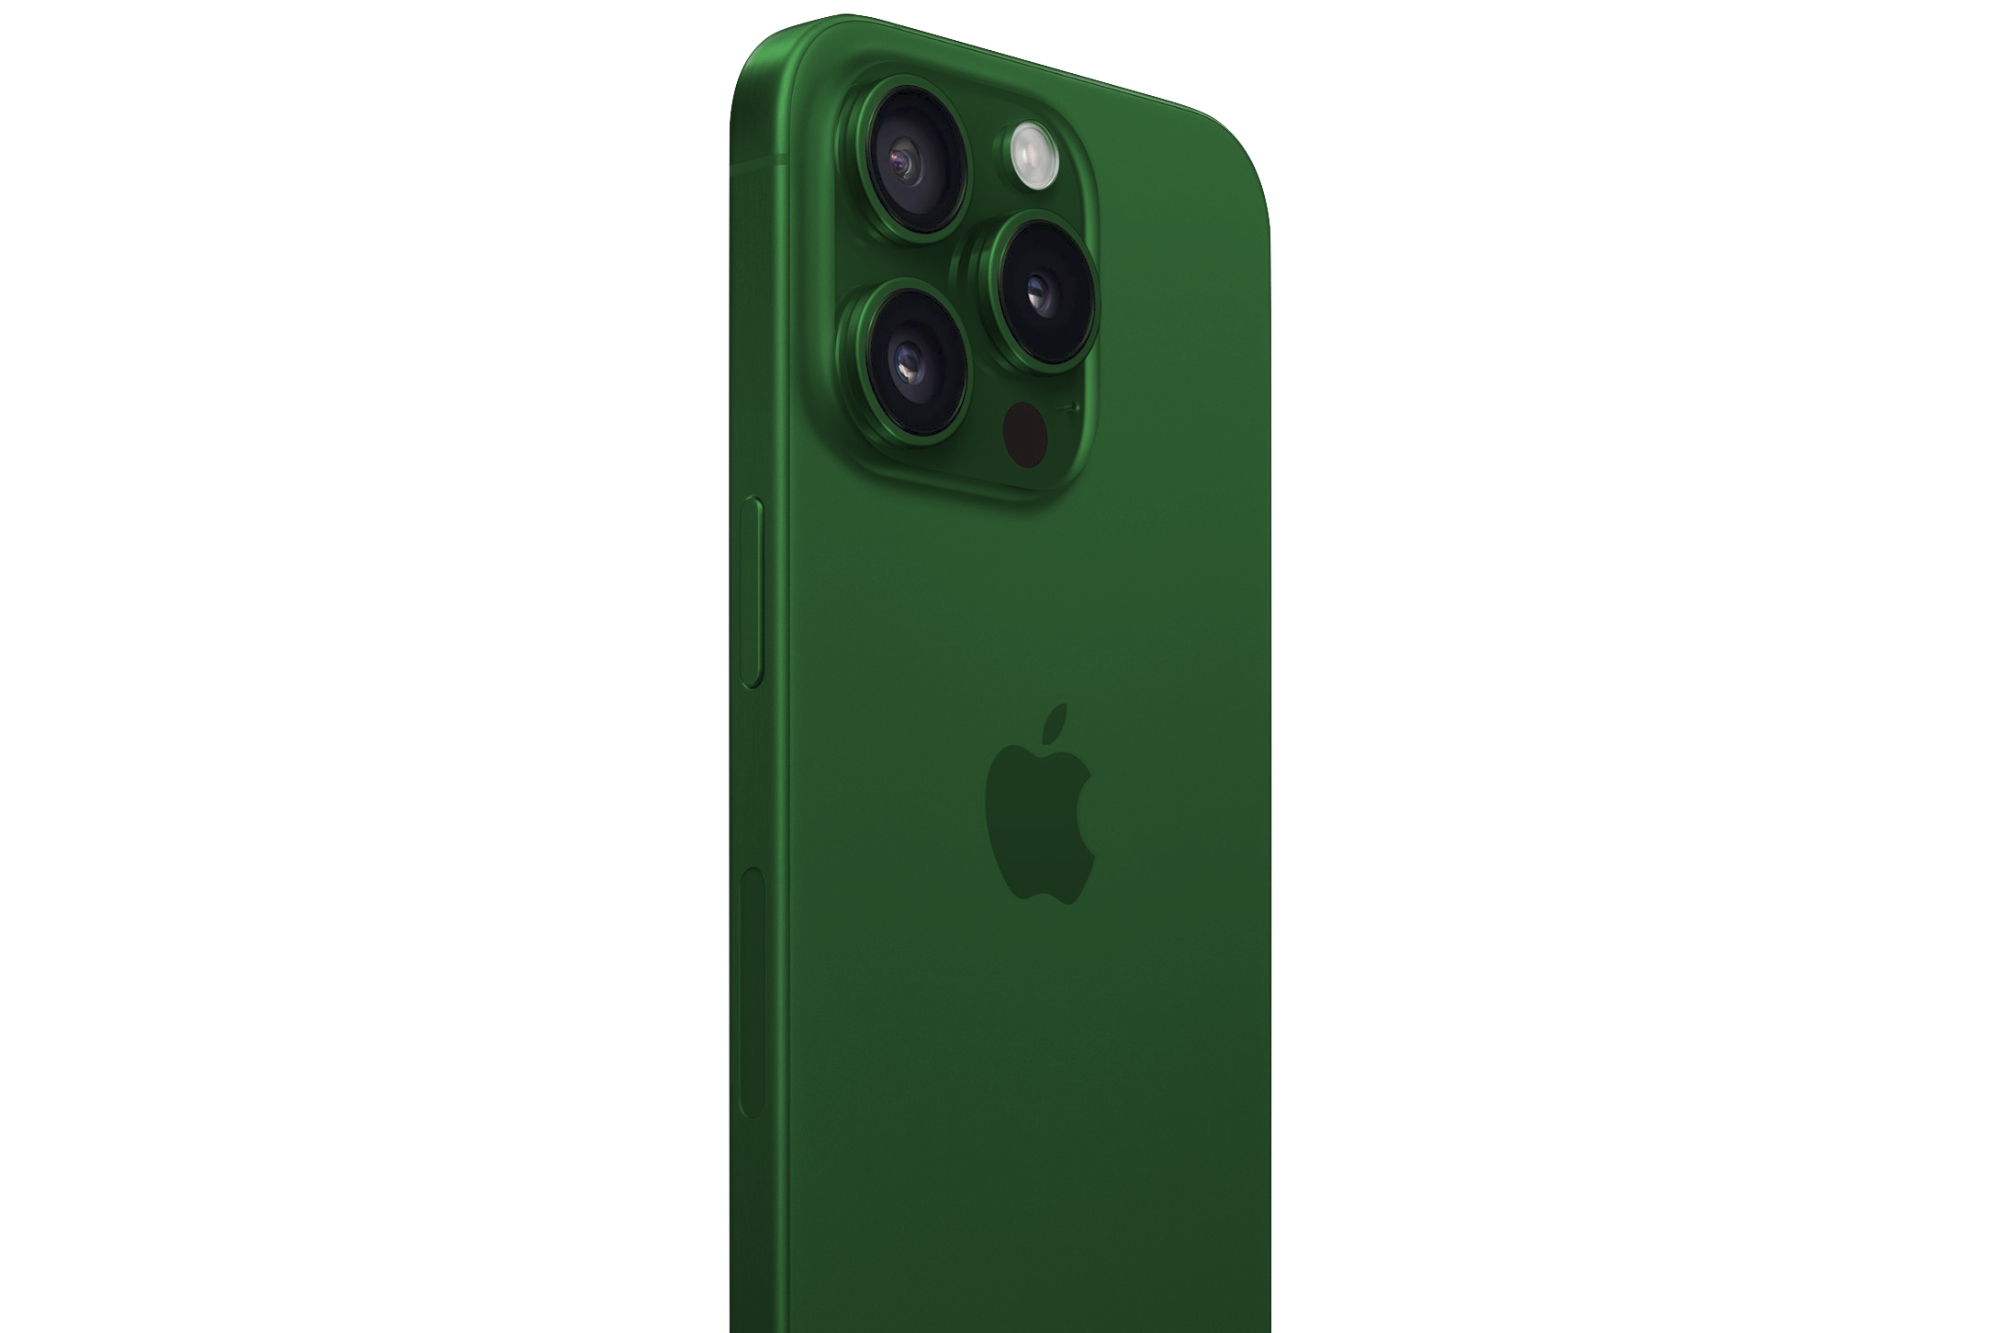 iPhone 15 Pro in a dark green color.